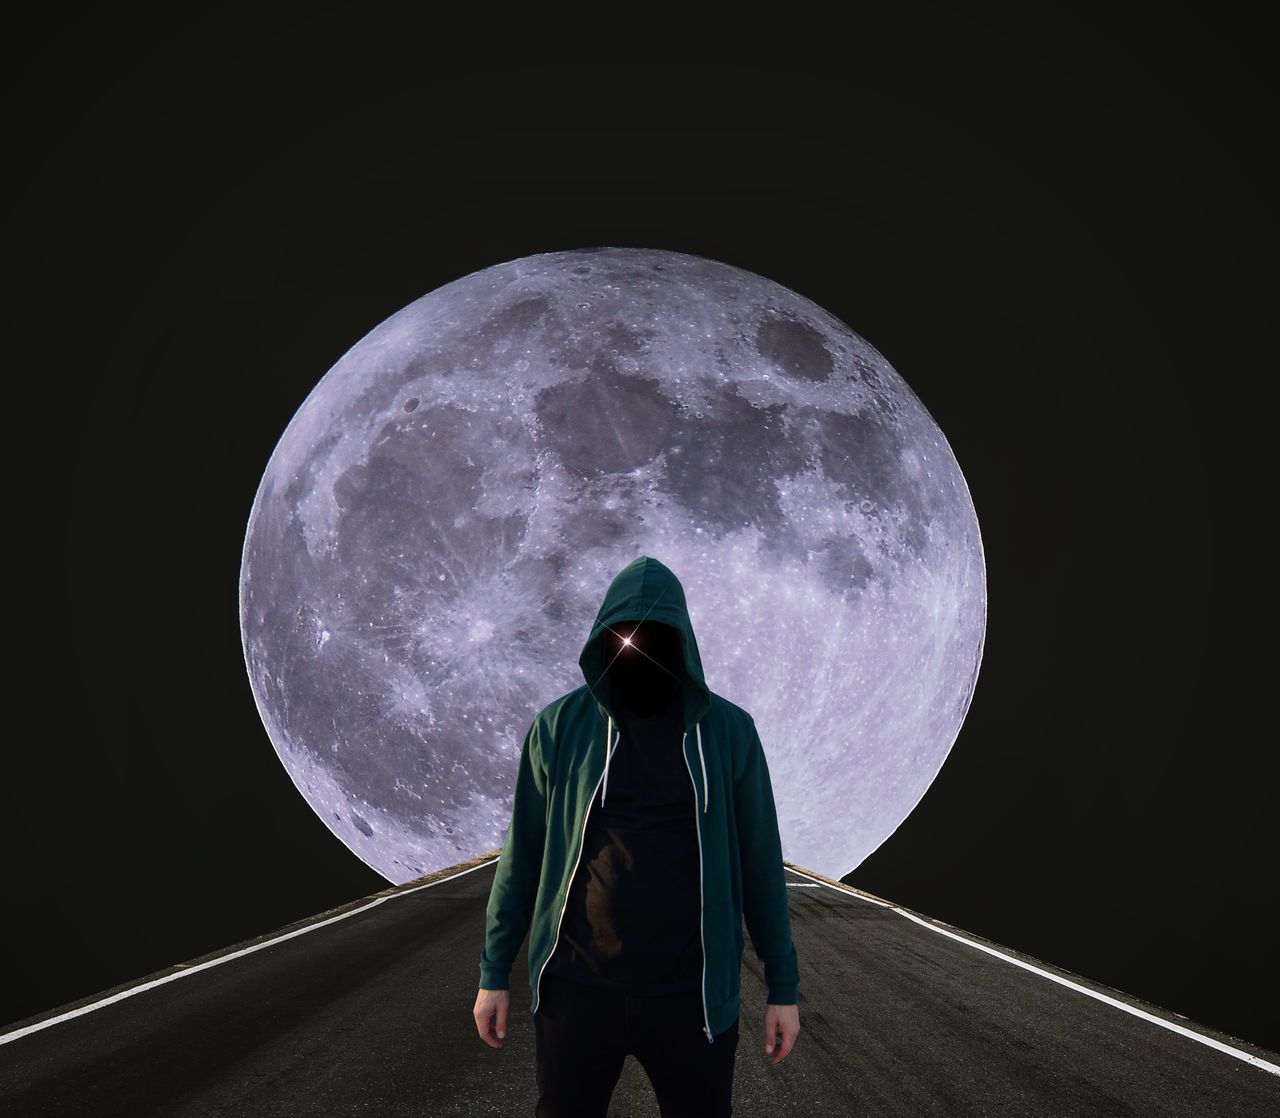 REAR VIEW OF MAN SITTING AGAINST FULL MOON